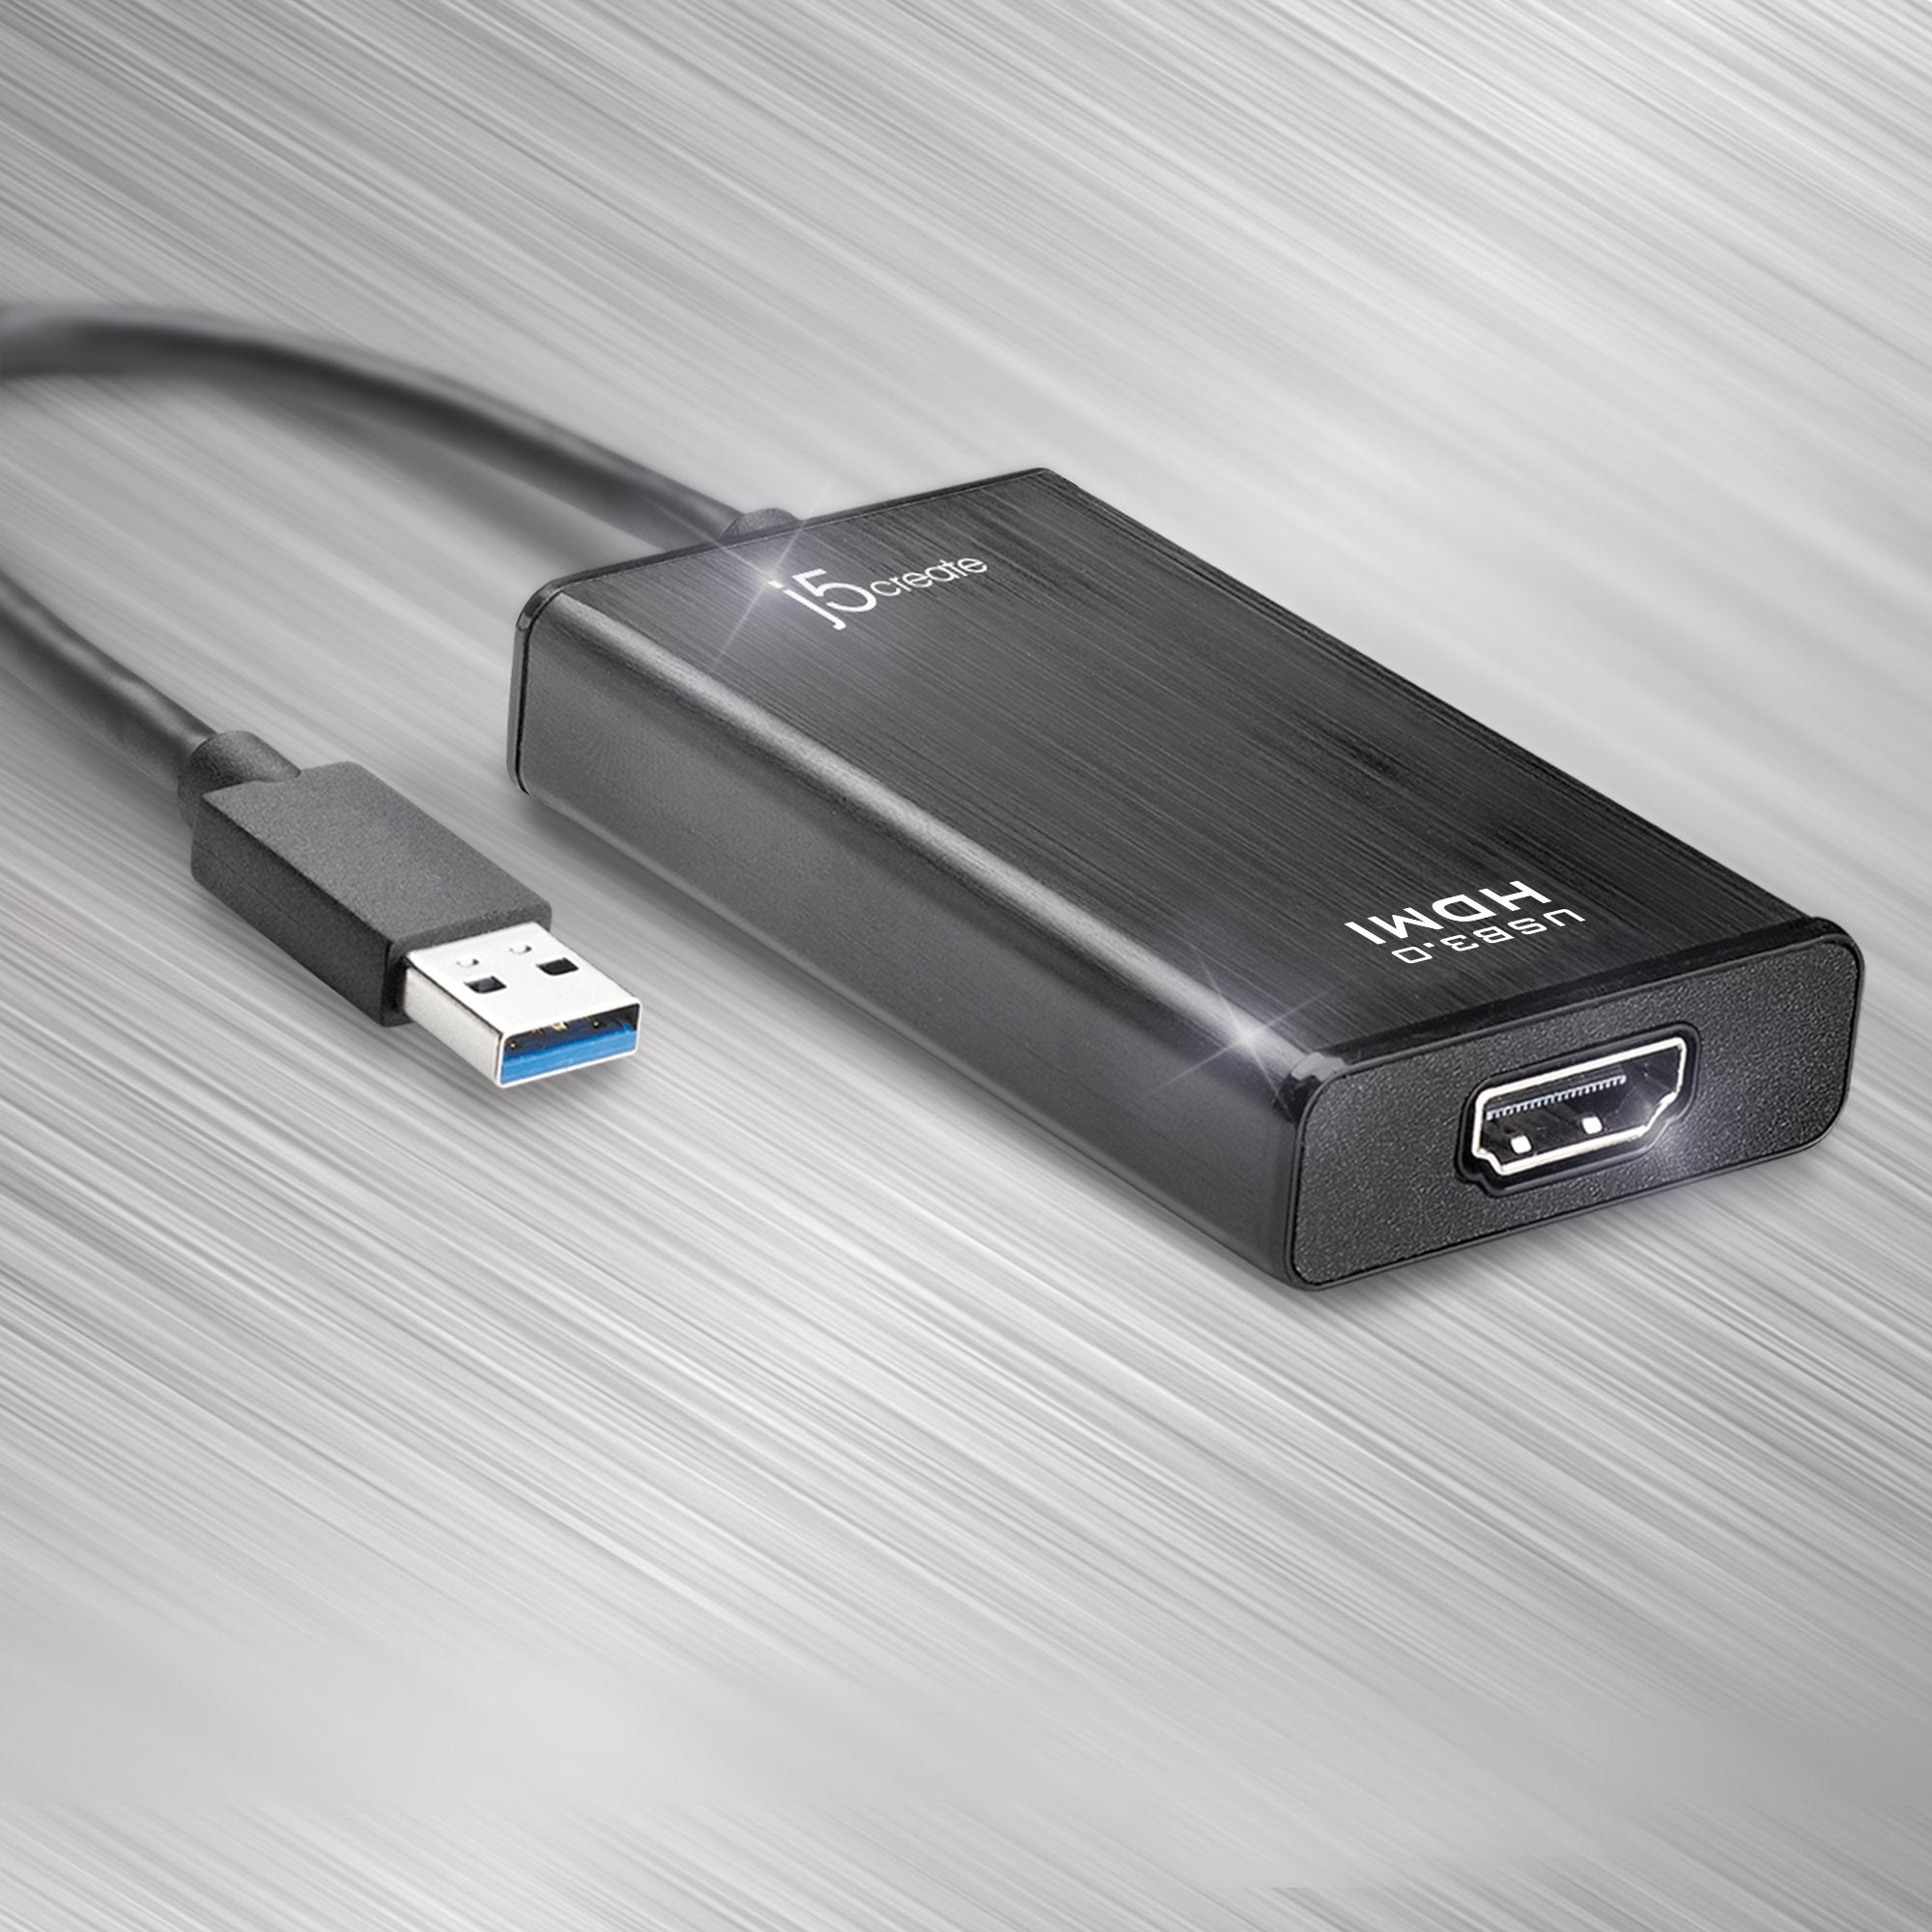 insignia usb to ethernet adapter driver download